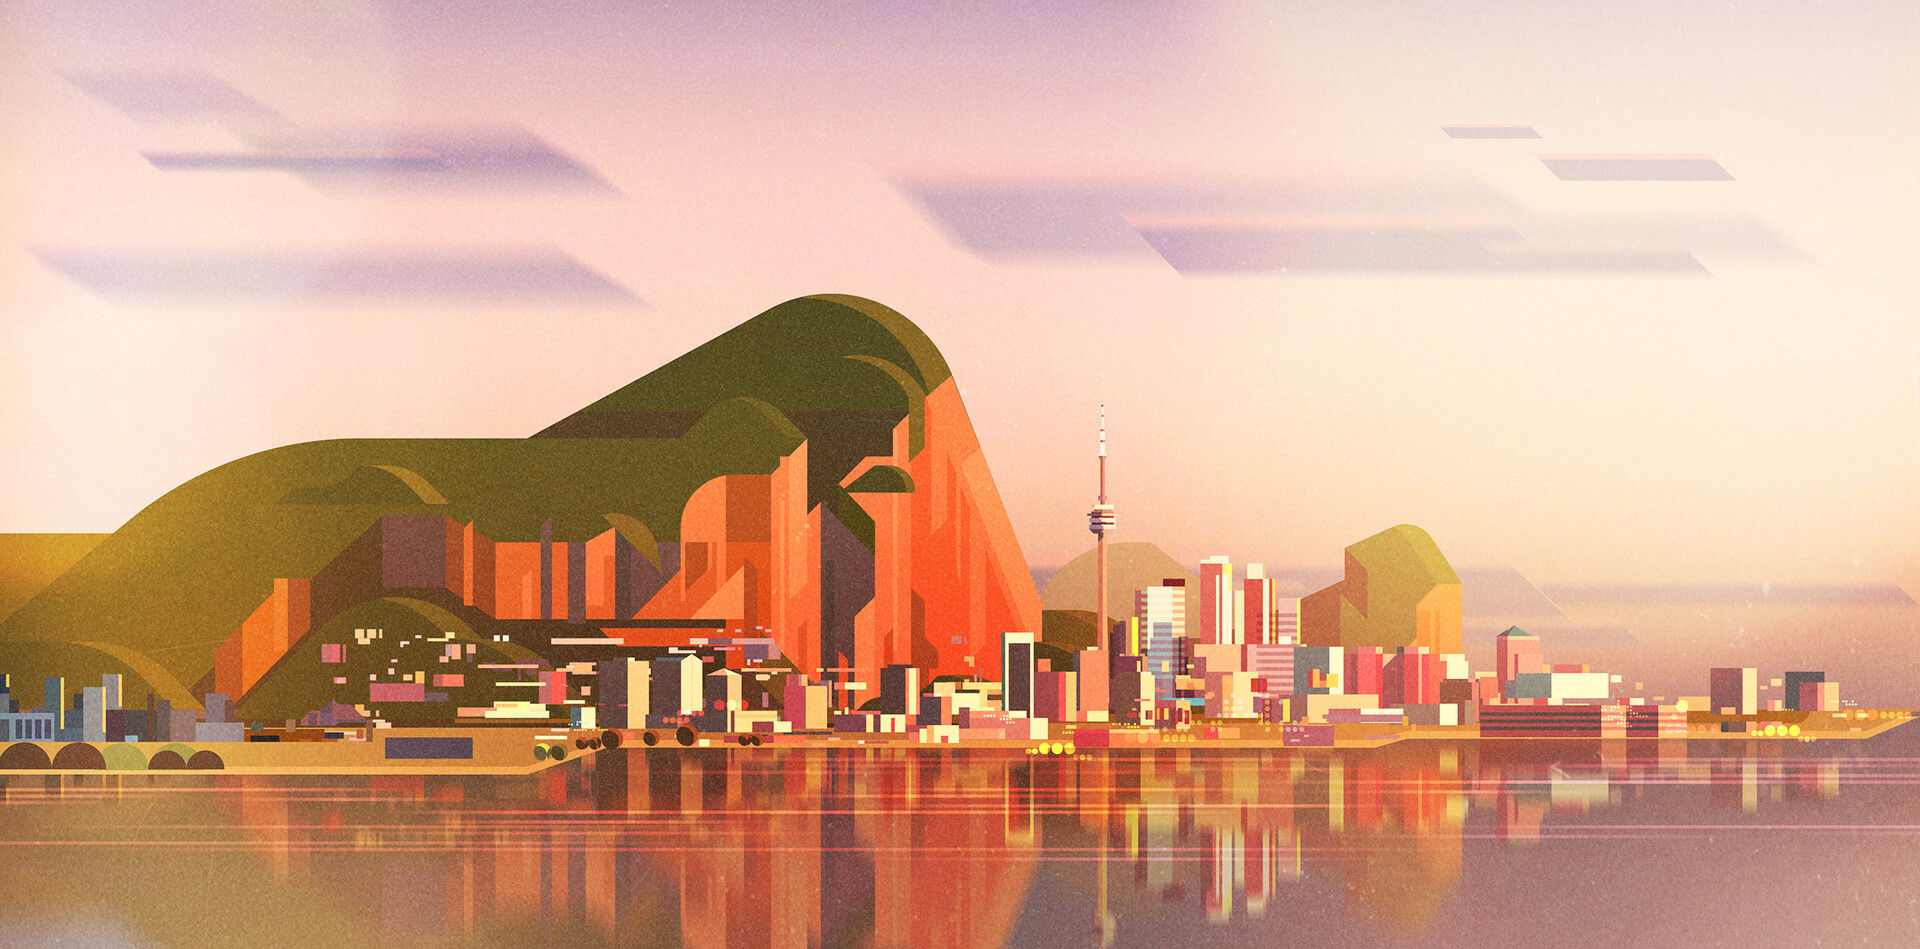 Mountain View Tower Skyscraper City Clouds Sunset Reflection James Gilleard 1920x949